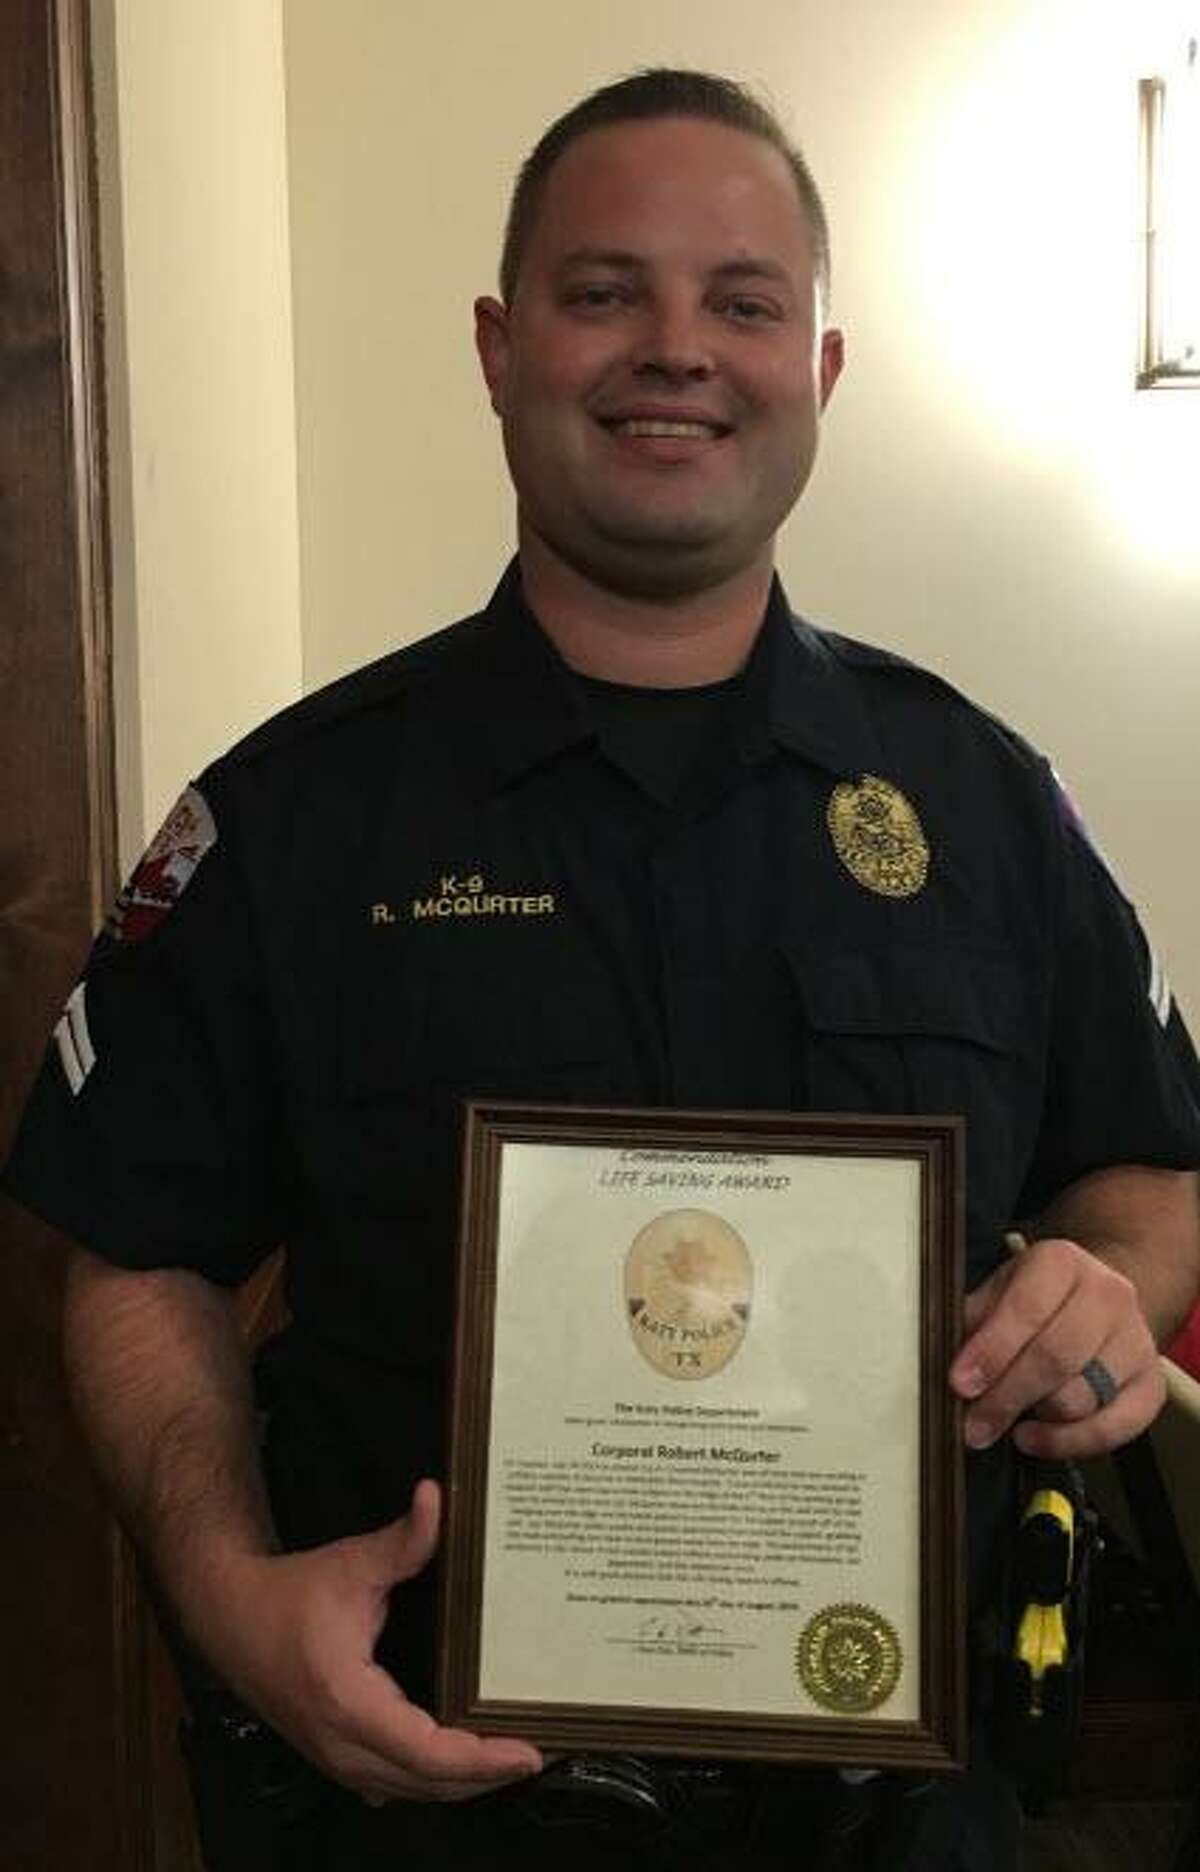 Corporal Robert McQurter of the Katy Police Department received a life-saving award at the Aug. 26 Katy City Council meeting from Police Chief Noe Diaz.